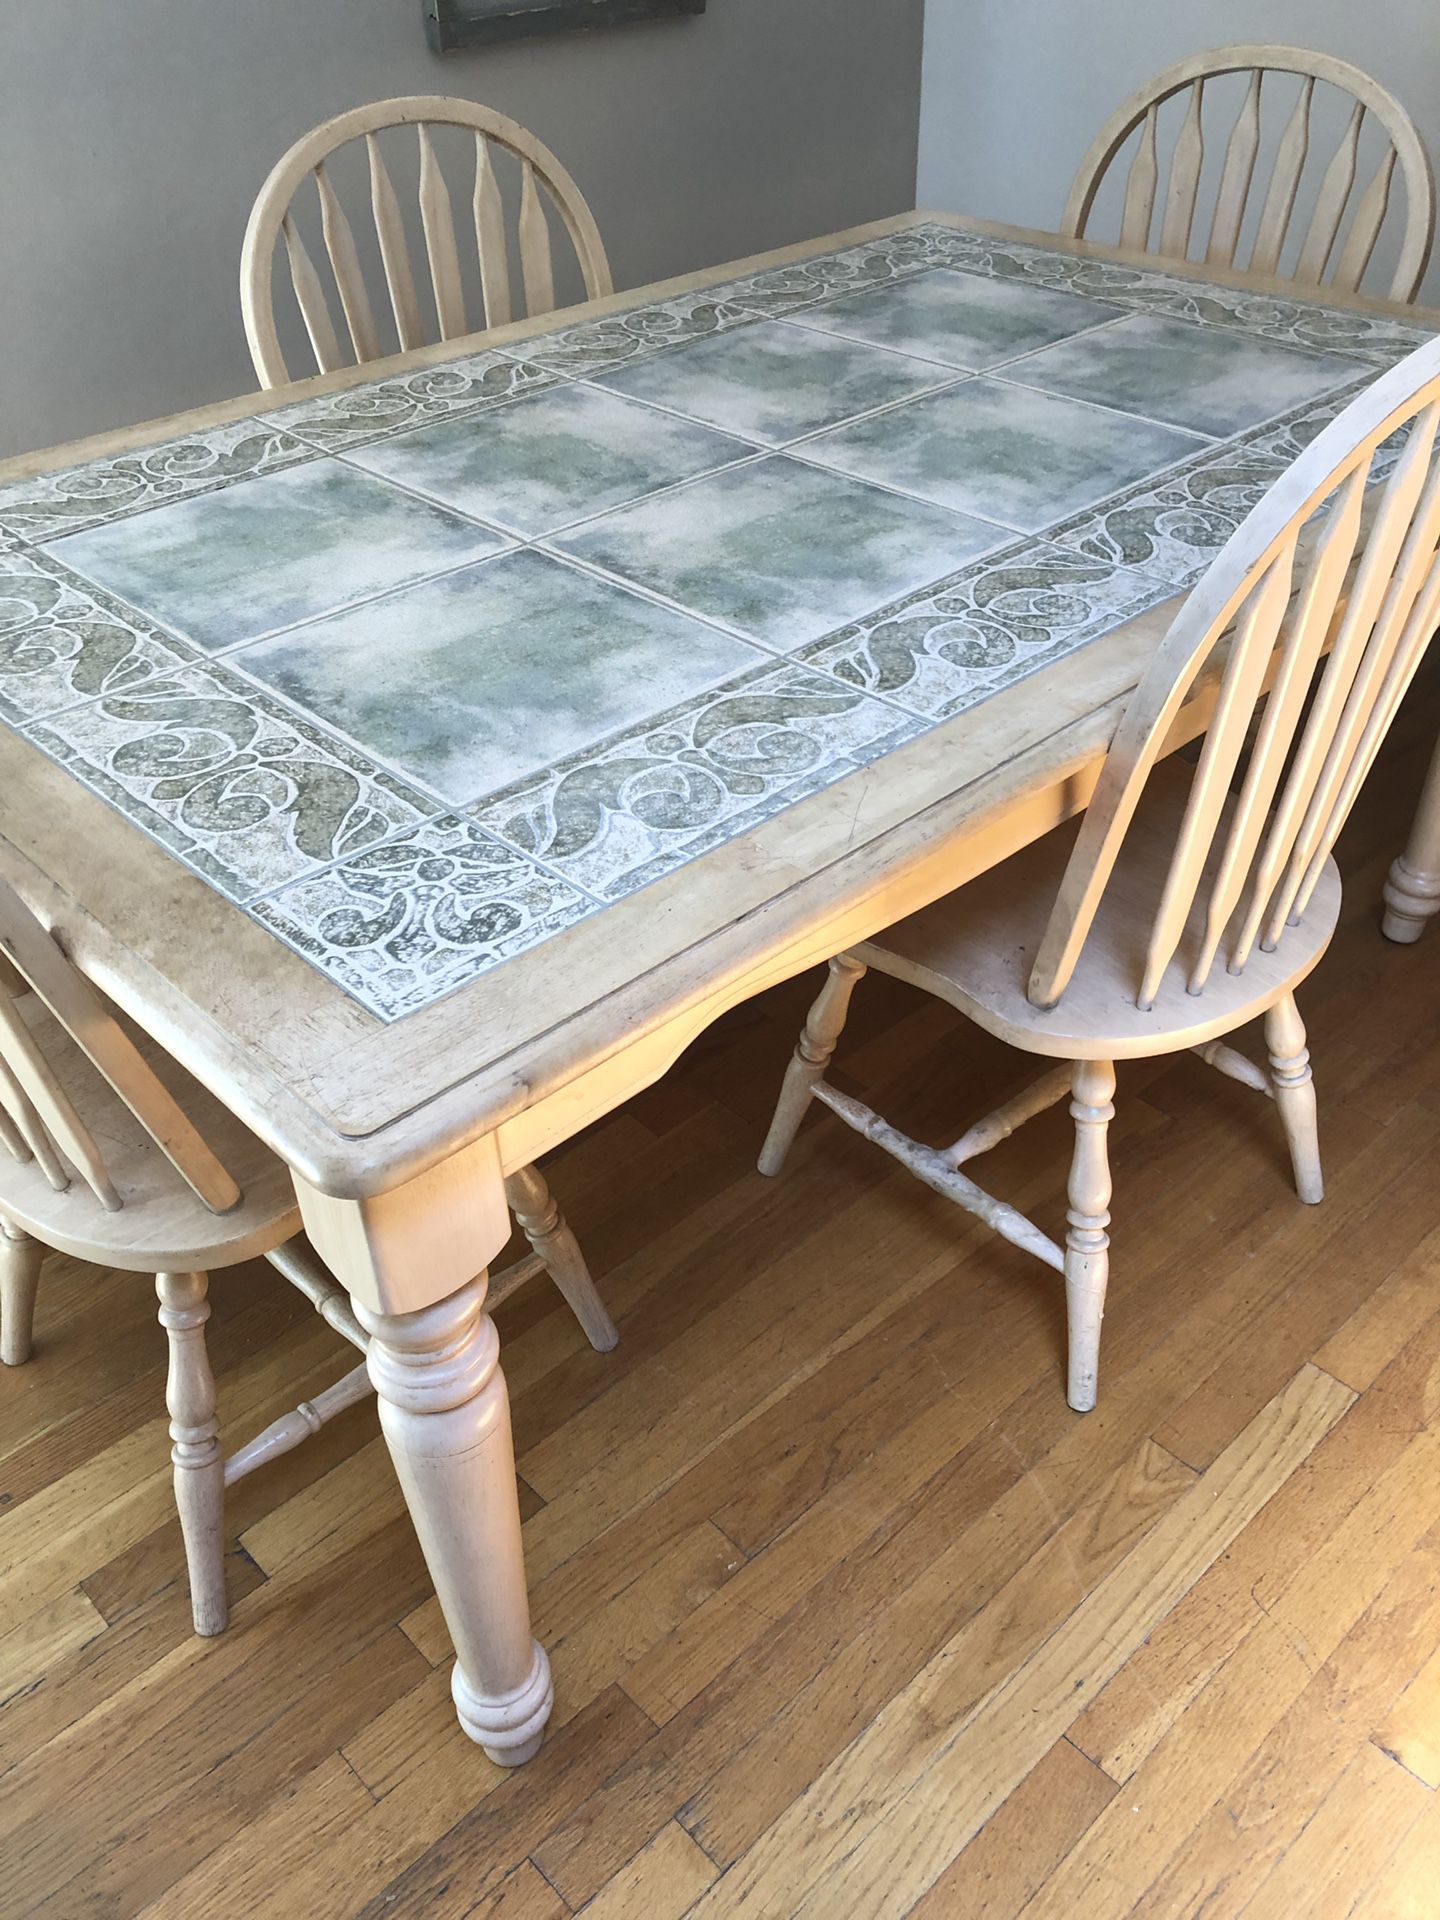 Kitchen table with 4 matching chairs